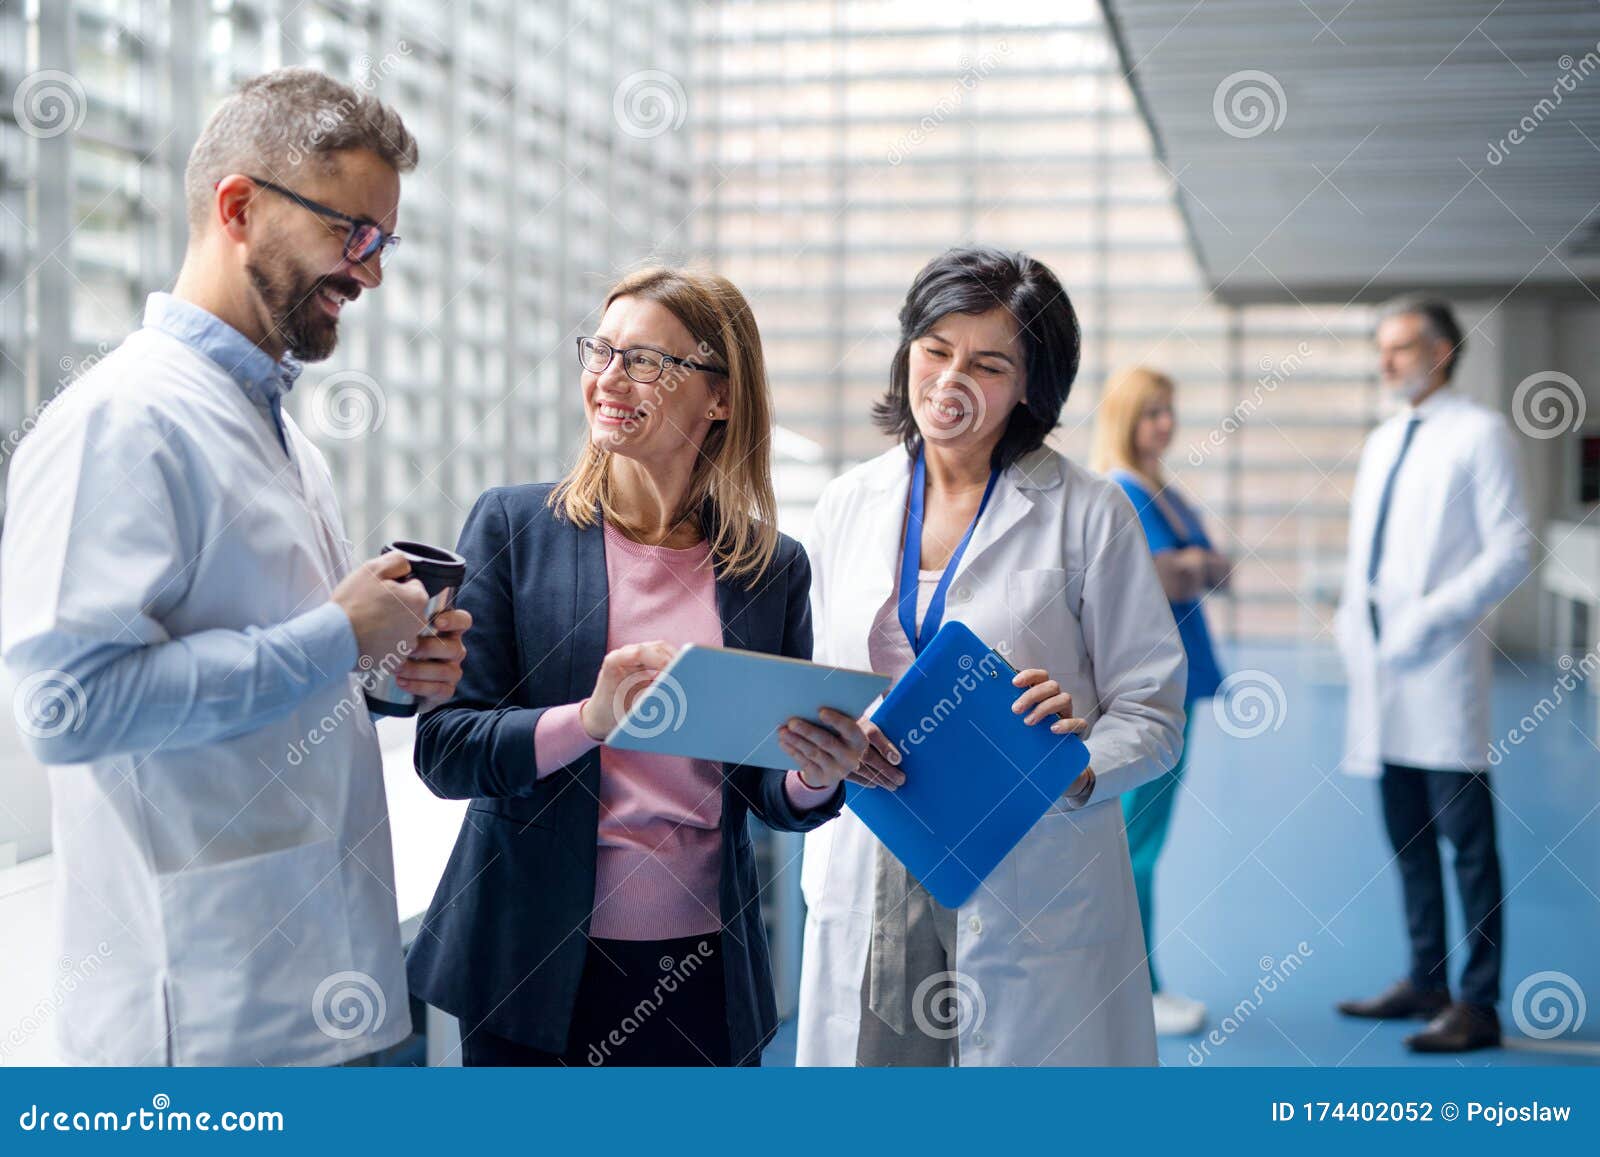 group of doctors talking to pharmaceutical sales representative.